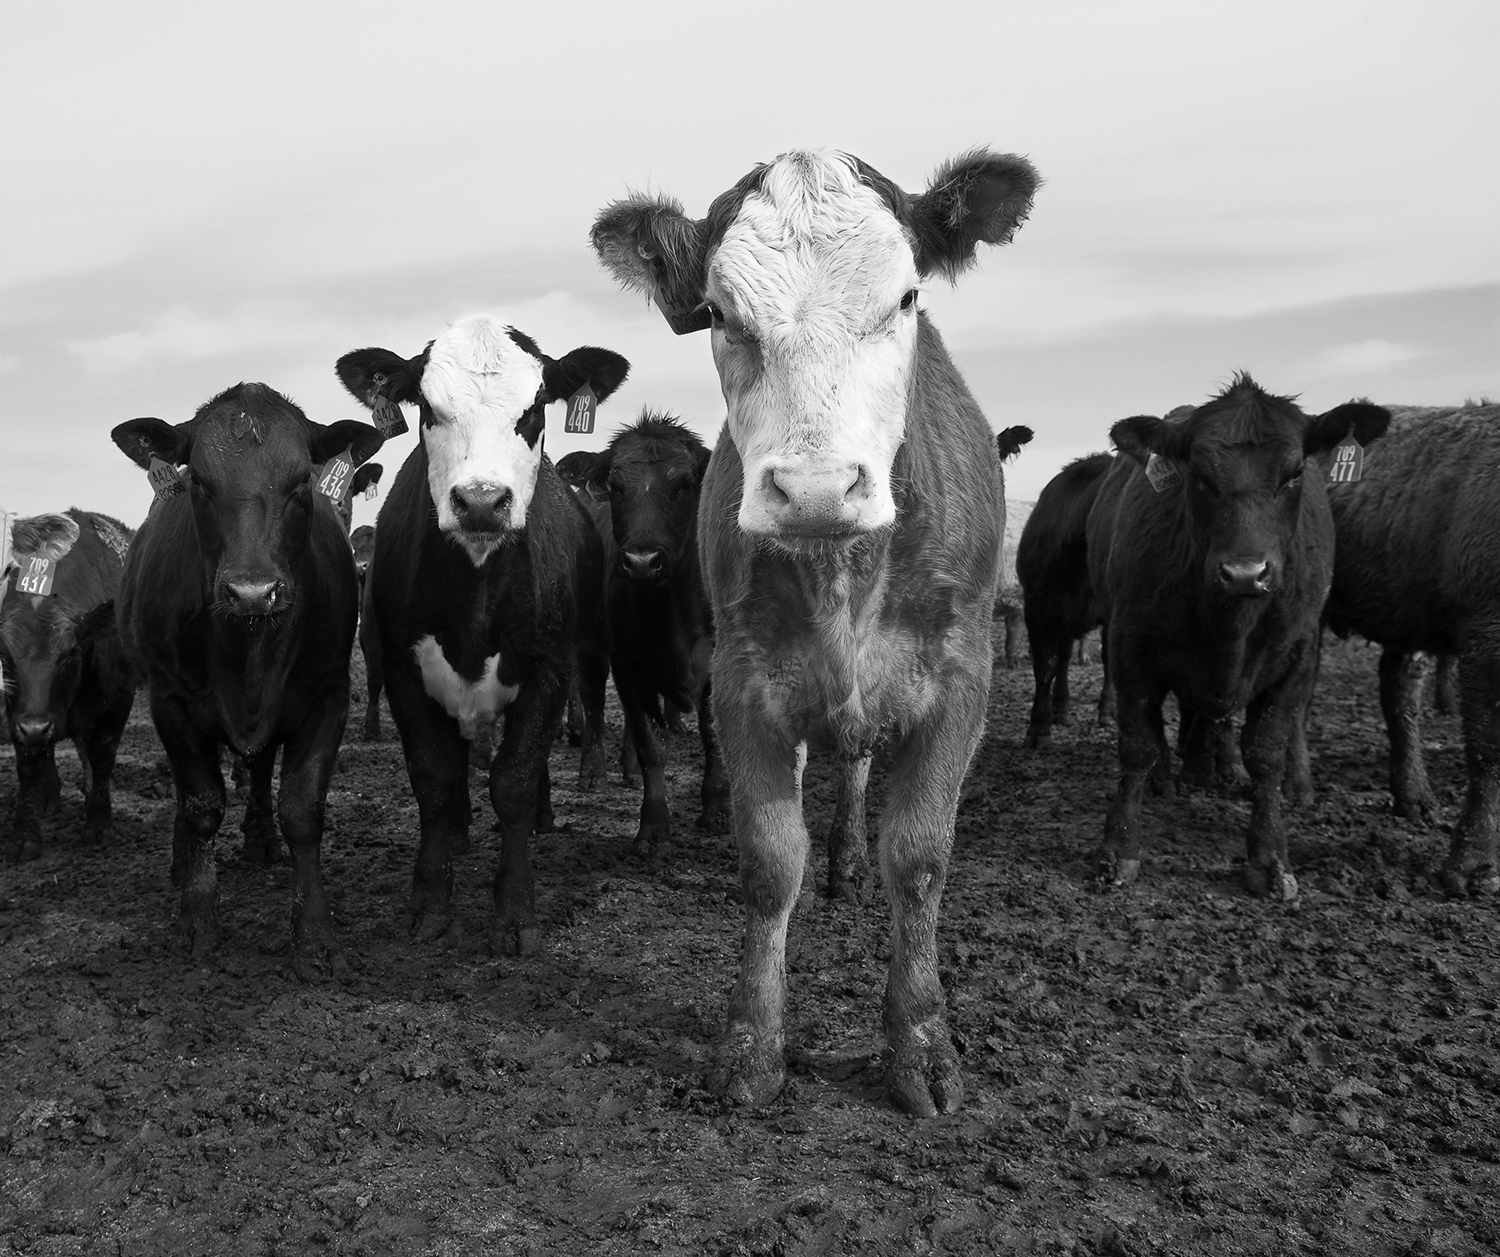 Black and white image of cattles gathered together in a pasture.